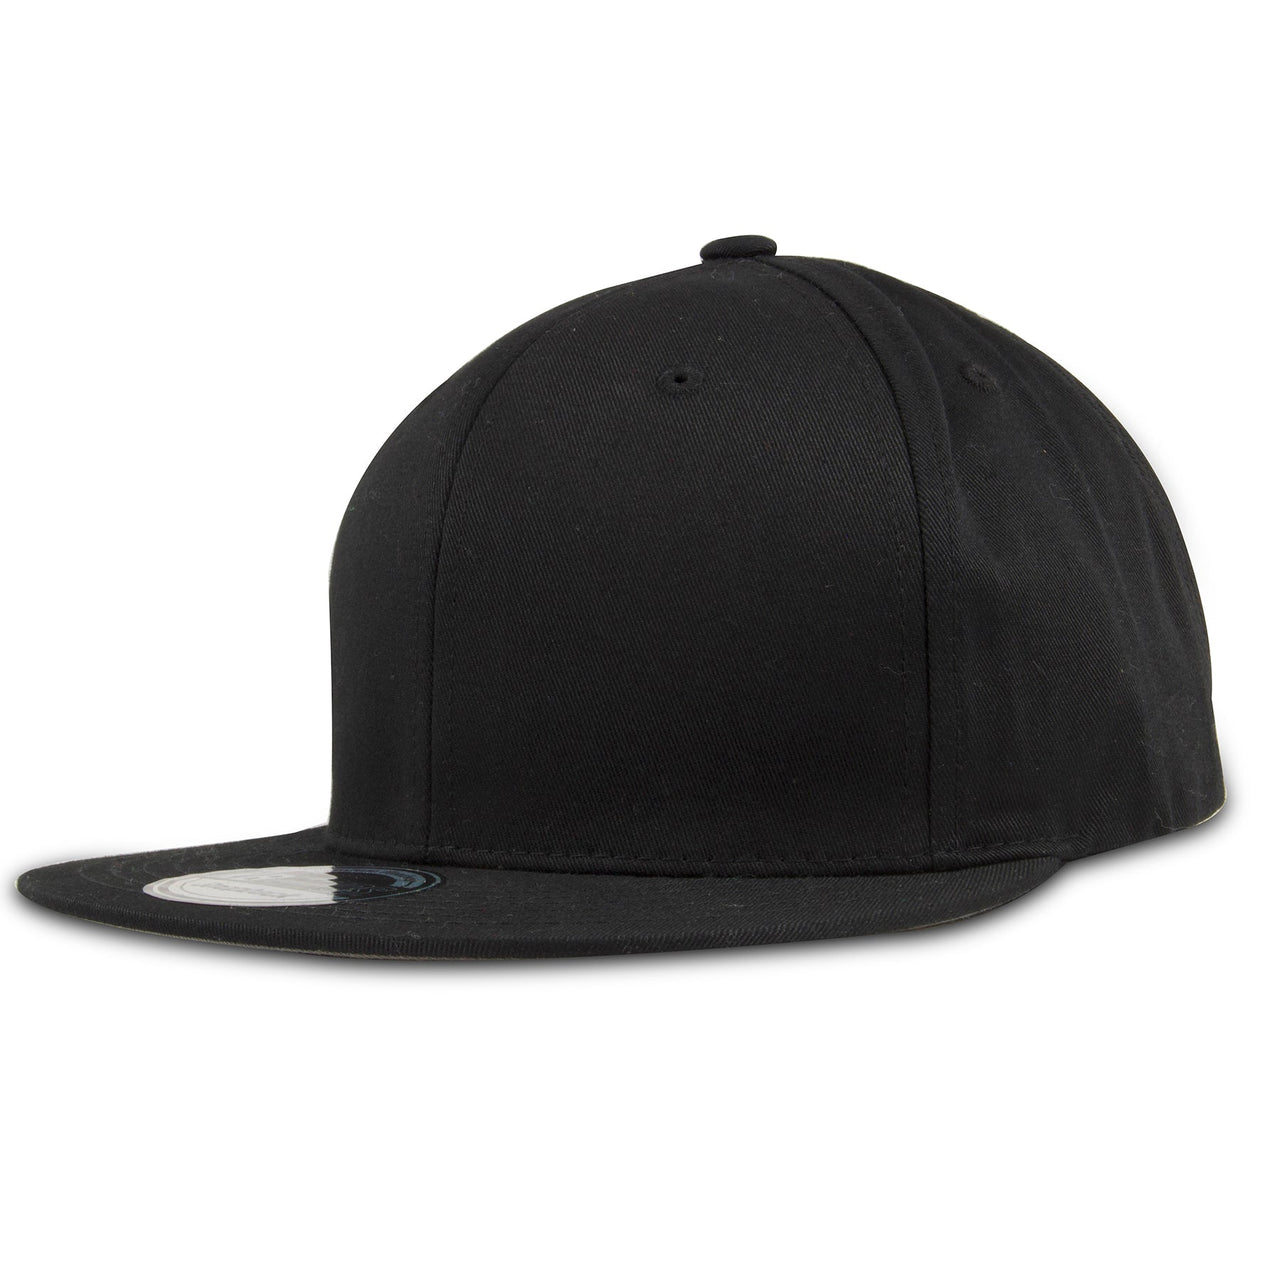 This blank black adjustable snapback is made out of 100% cotton and features no embellishments